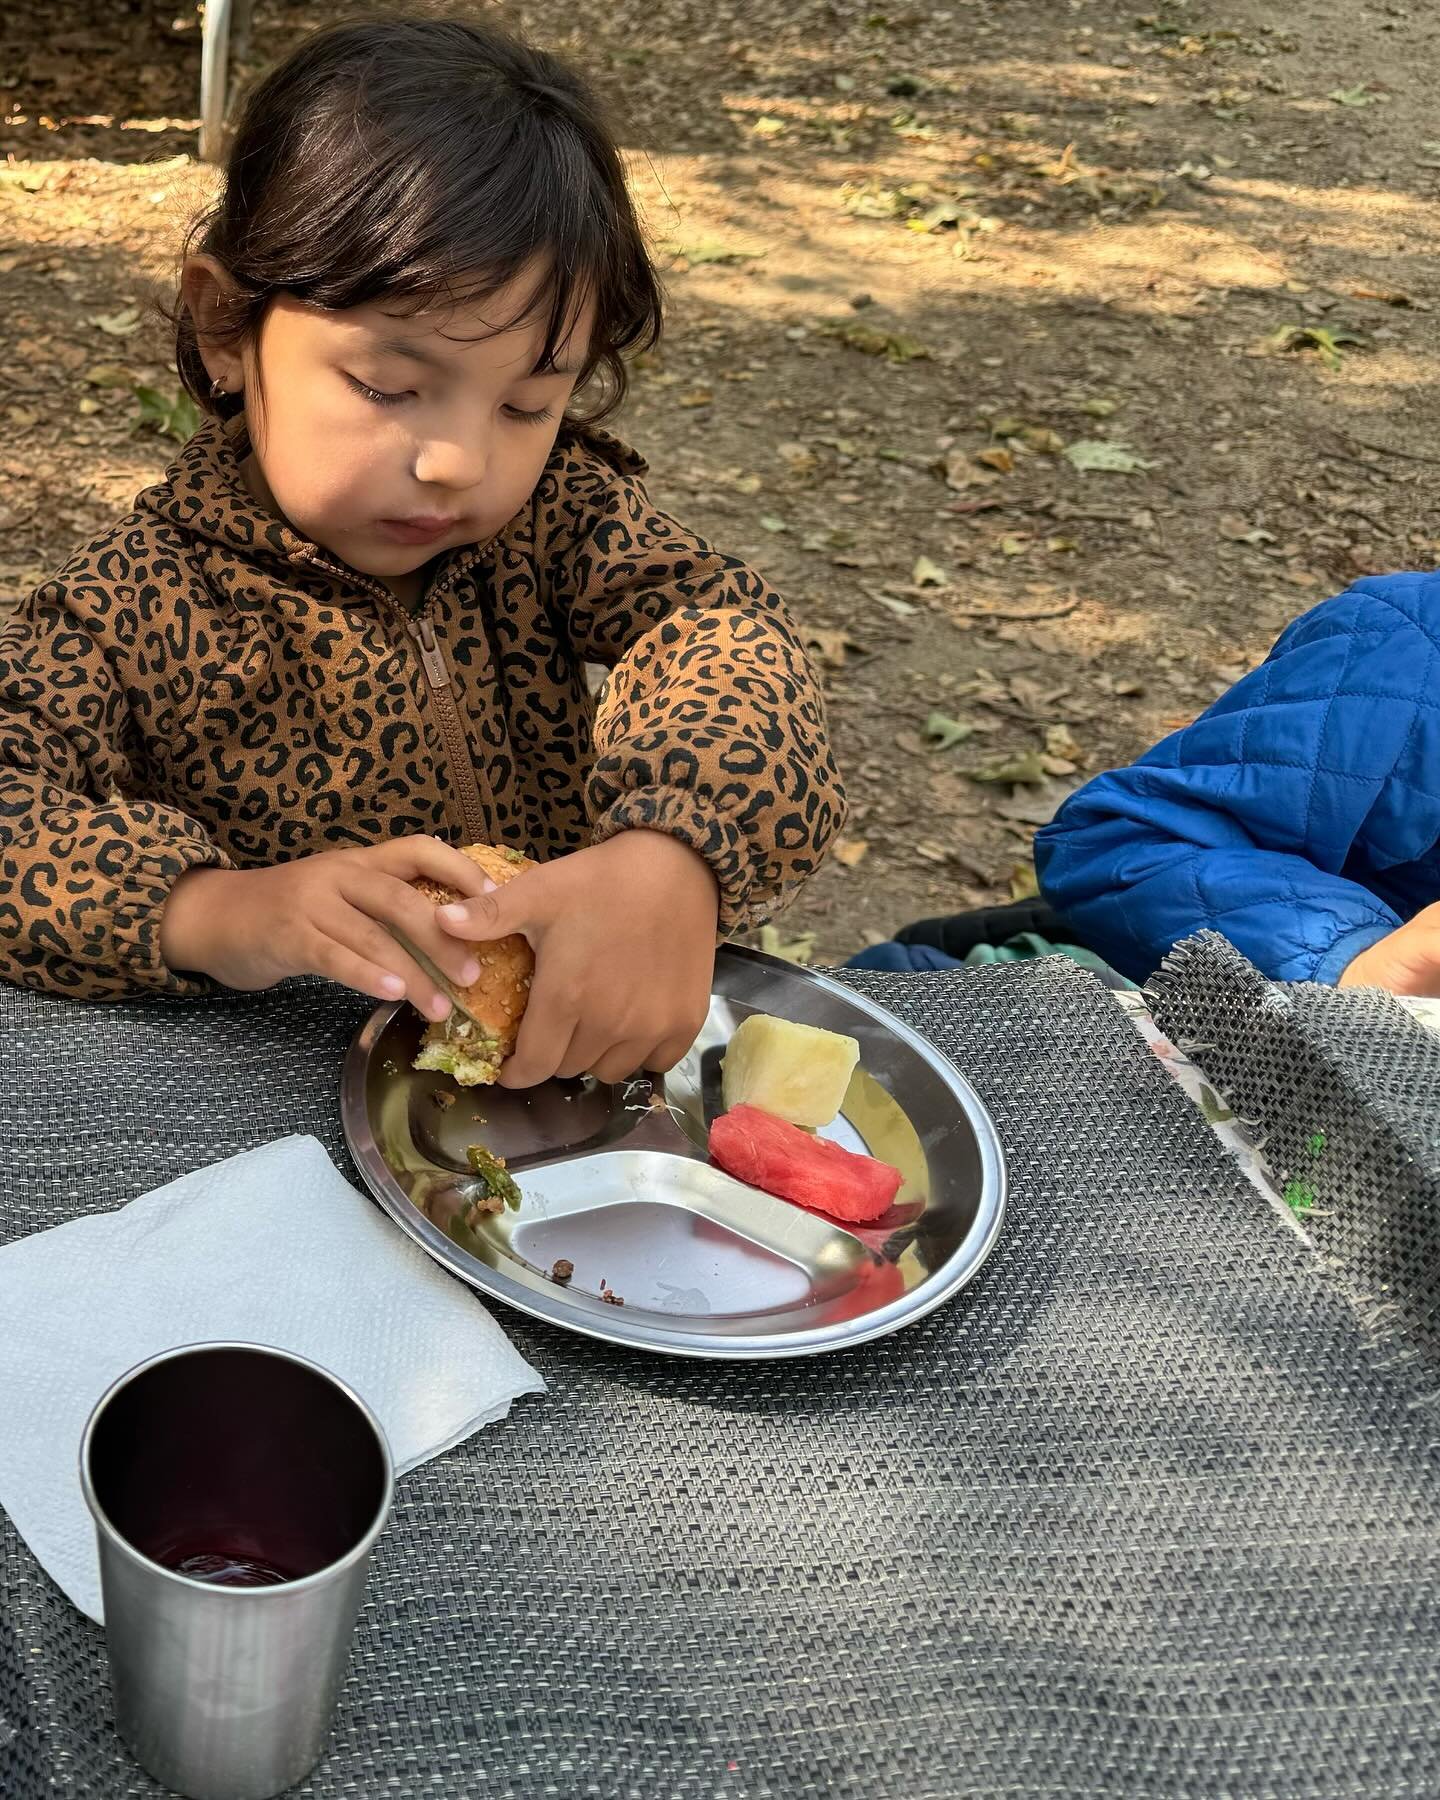 For Cinco de Mayo we had authentic cemita sandwiches and jamaica hibiscus agua fresca from @official.antojitospuebla The kids all devoured everything, which is pretty rare for preschoolers trying new foods. They even got jamaica mustaches, so cute! W